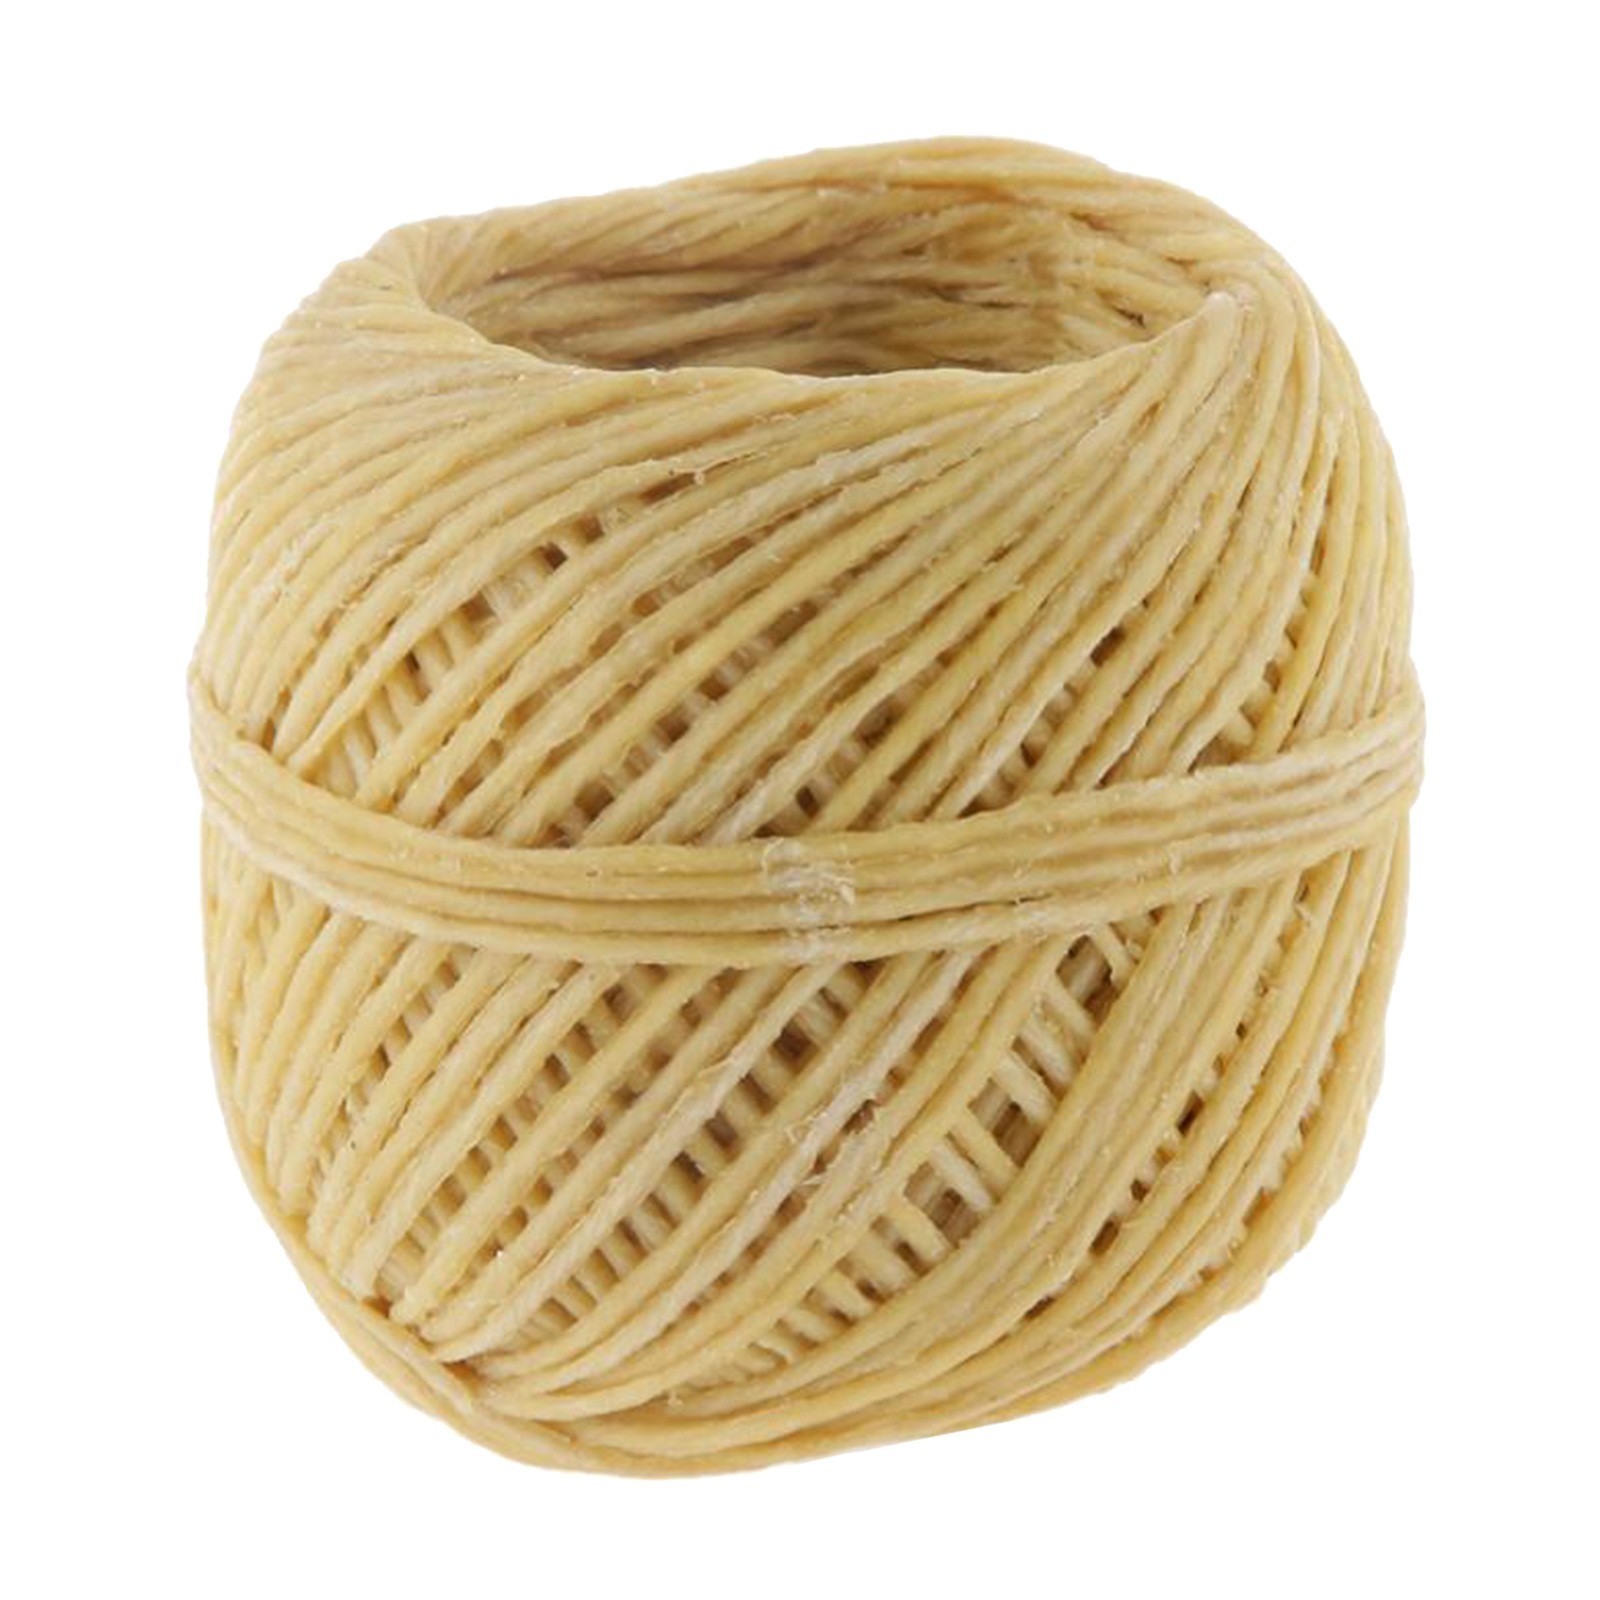 Ana 32FT/1Roll Beeswax Wick 1.2mm Organic Beeswax DIY Kits Wicks for  Candlemaking Waxed Cotton Core Wicks Tabbed Wick Slow Burn Candle Wicks  Ignition Wax Rope Wick for Candle Making Beeswax Rope 